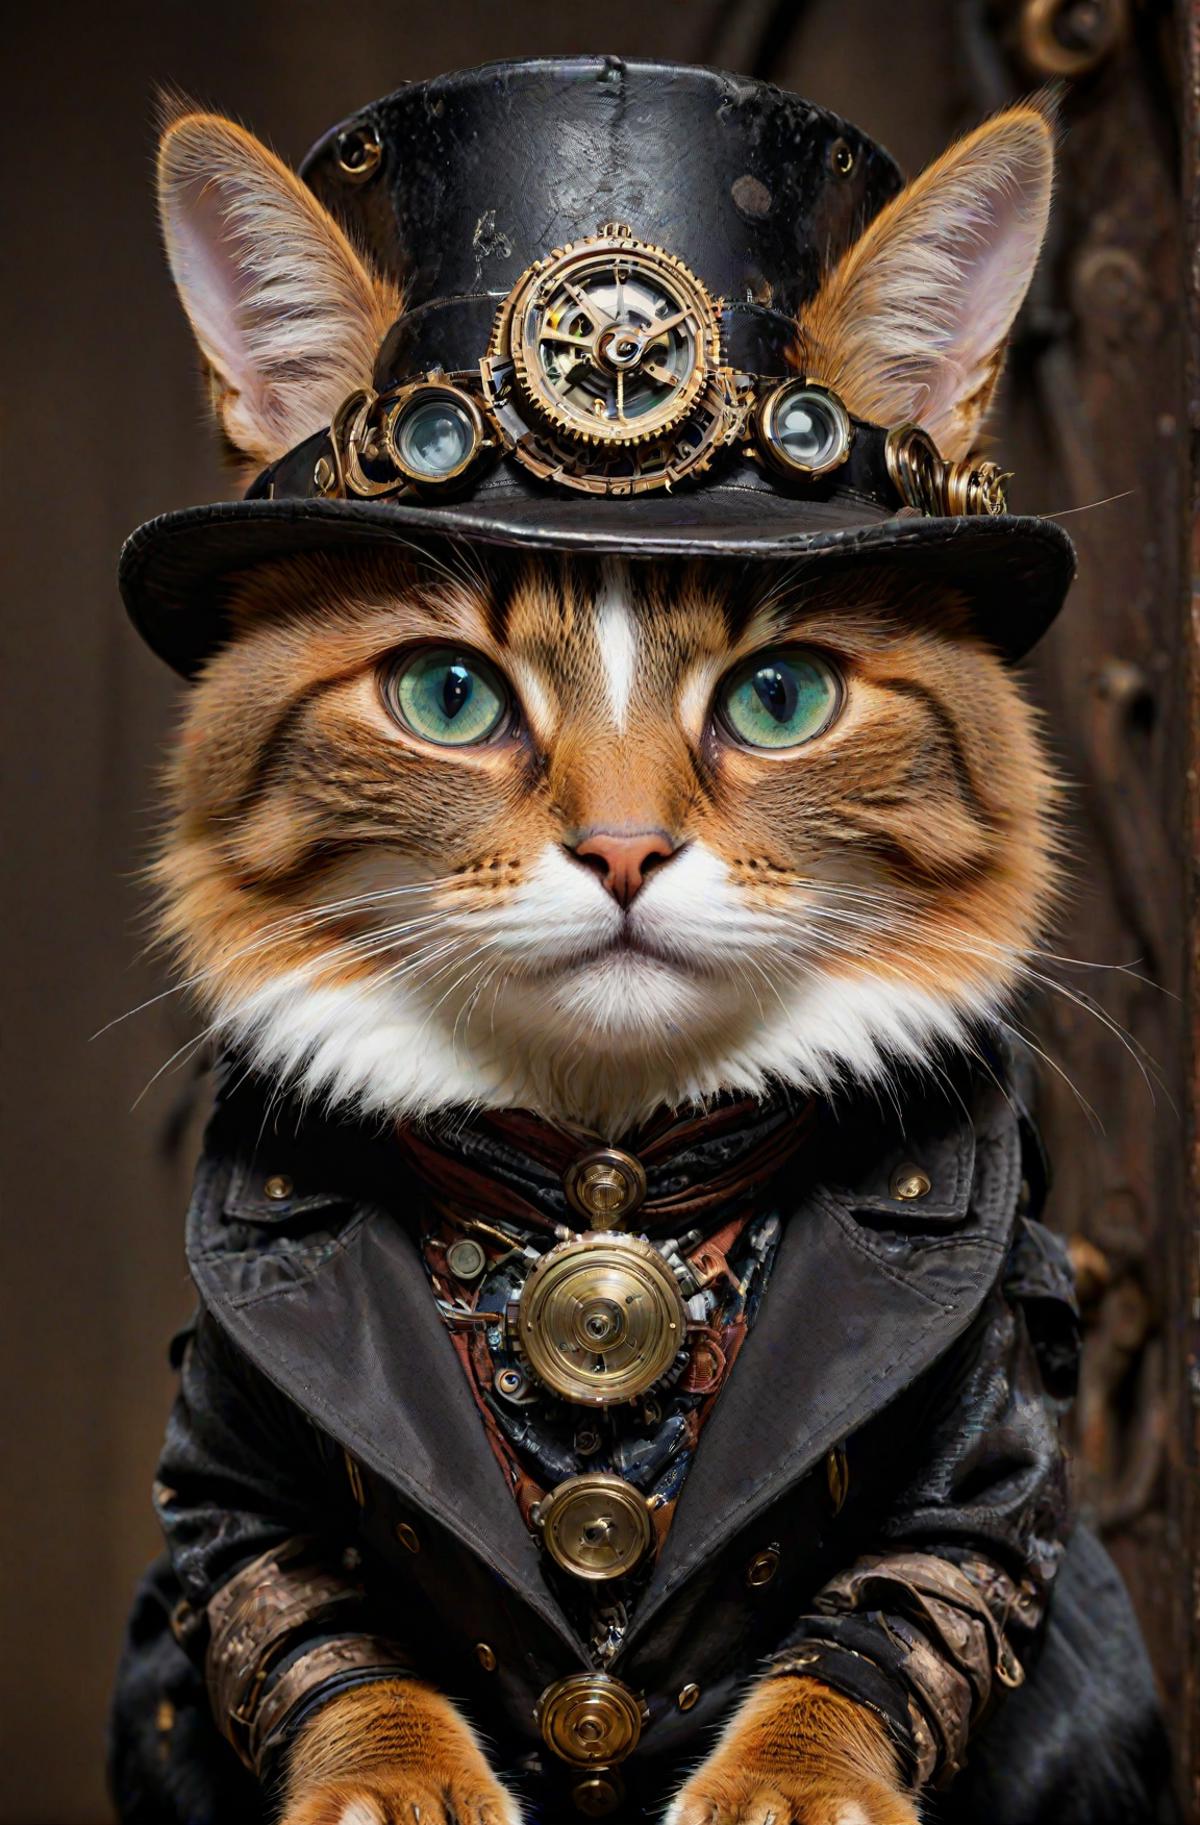 A cat wearing a hat with gears on it, standing in front of a wooden wall.